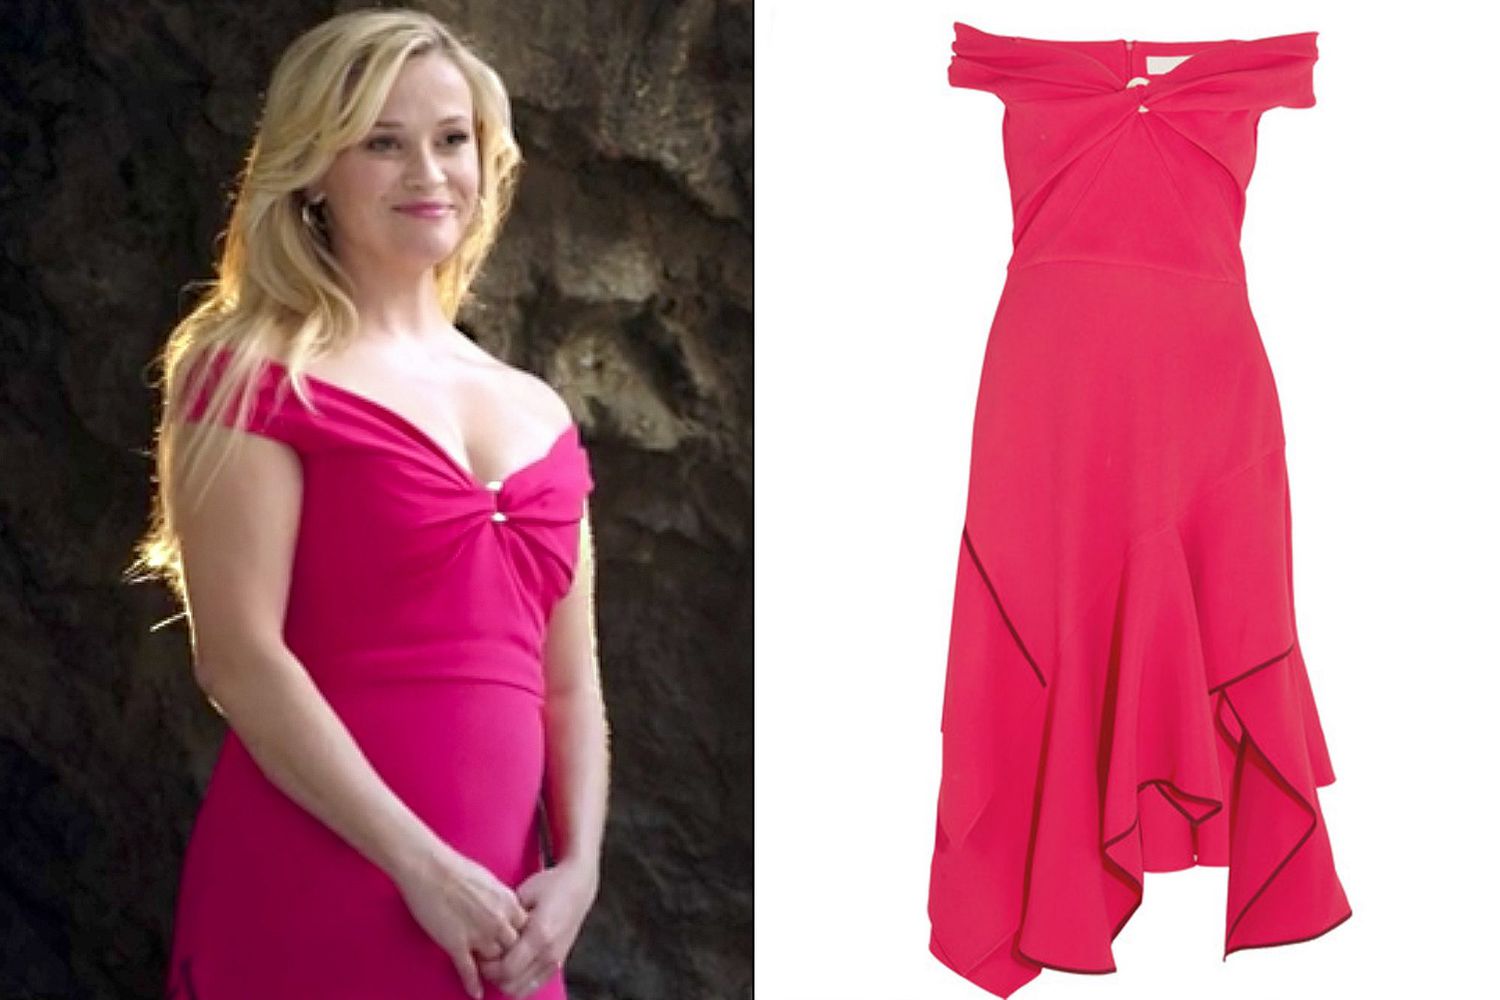 Reese Witherspoon's off-the-shoulder dress on The Mindy Project